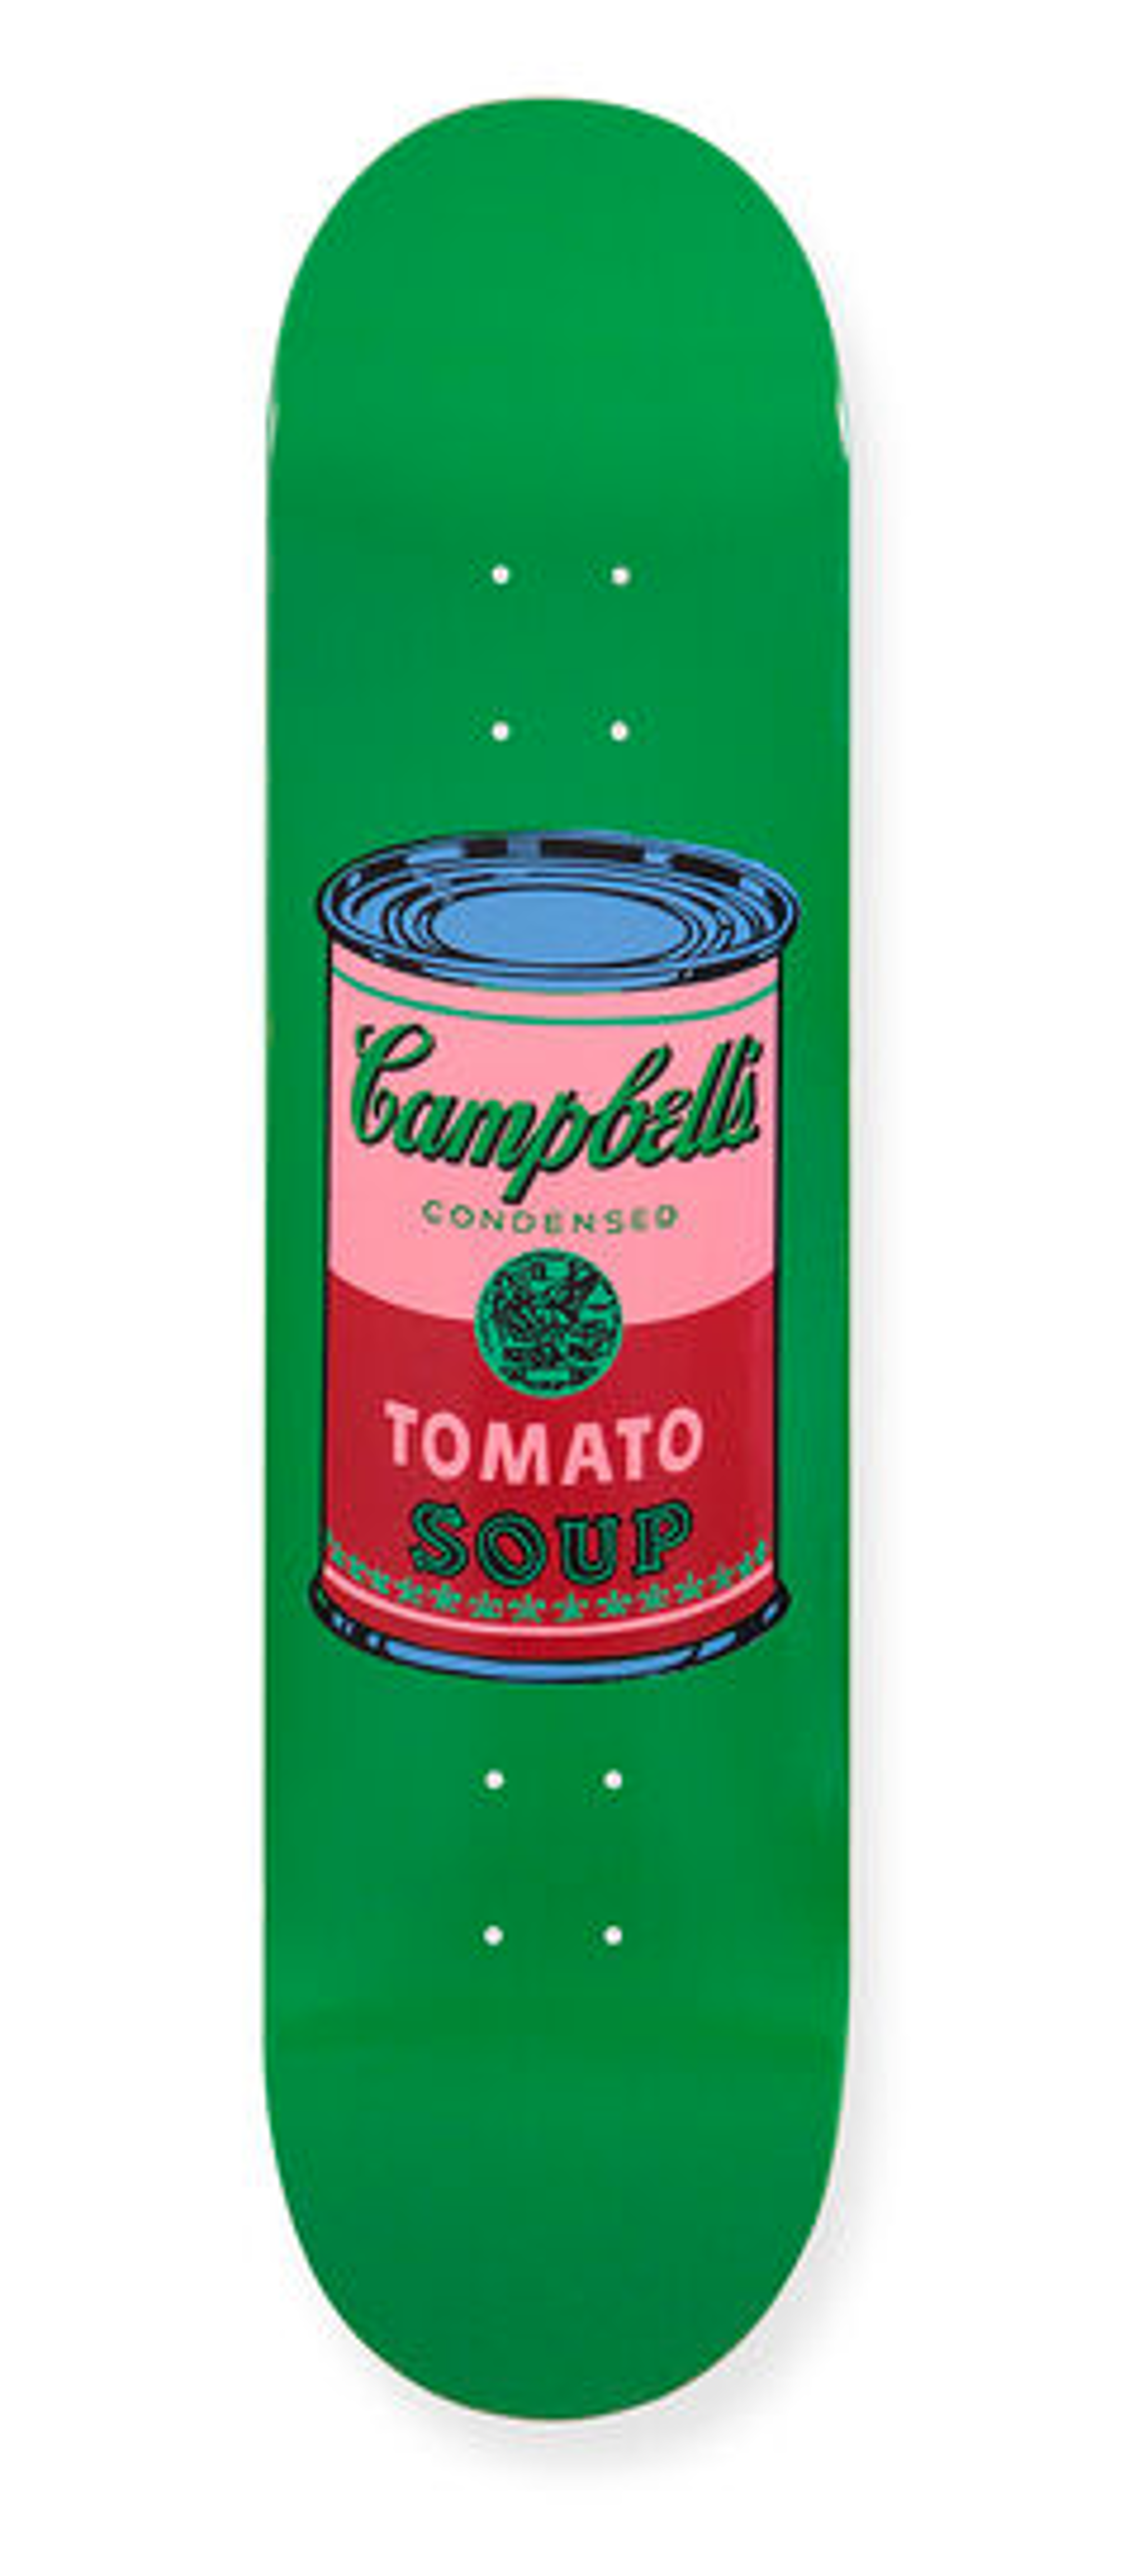 Campbell's Soup Skate Deck (Green with Blue Can) by Andy Warhol